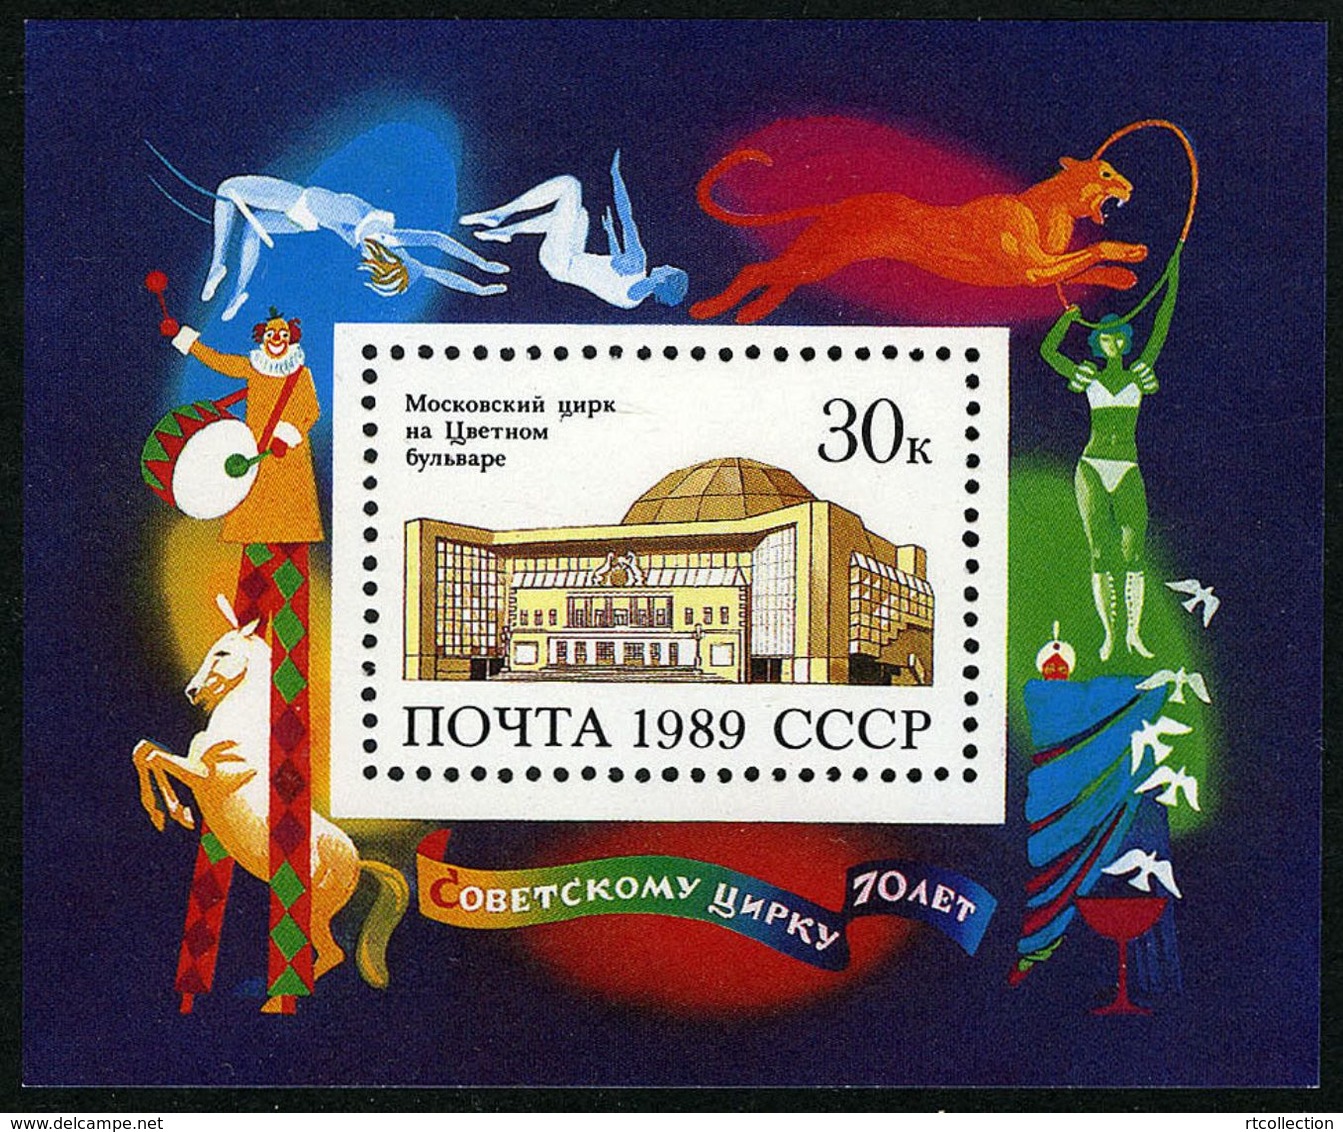 USSR Russia 1989 Soviet Union 70th Anniv Circus Performers Moscow Animals Fauna ART S/S Stamp MNH Mi BL209 SC 5807 - Cirque